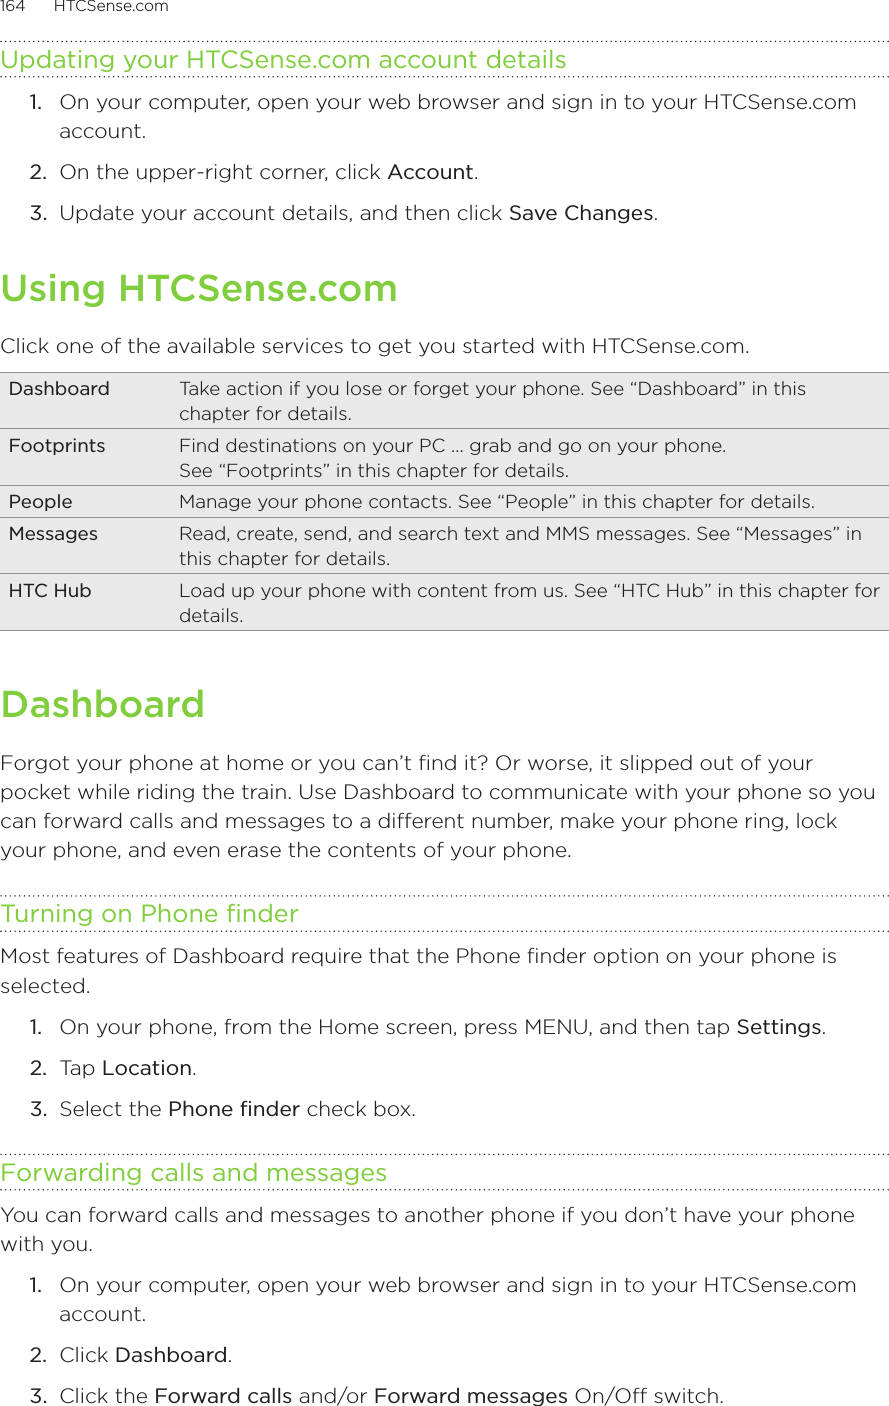 164      HTCSense.com      Updating your HTCSense.com account details1.  On your computer, open your web browser and sign in to your HTCSense.com account.2.  On the upper-right corner, click Account.3.  Update your account details, and then click Save Changes.Using HTCSense.comClick one of the available services to get you started with HTCSense.com.Dashboard Take action if you lose or forget your phone. See “Dashboard” in this chapter for details. Footprints Find destinations on your PC … grab and go on your phone.  See “Footprints” in this chapter for details. People Manage your phone contacts. See “People” in this chapter for details. Messages Read, create, send, and search text and MMS messages. See “Messages” in this chapter for details. HTC Hub Load up your phone with content from us. See “HTC Hub” in this chapter for details. DashboardForgot your phone at home or you can’t find it? Or worse, it slipped out of your pocket while riding the train. Use Dashboard to communicate with your phone so you can forward calls and messages to a different number, make your phone ring, lock your phone, and even erase the contents of your phone. Turning on Phone finderMost features of Dashboard require that the Phone finder option on your phone is selected.On your phone, from the Home screen, press MENU, and then tap Settings.Tap Location.Select the Phone finder check box.Forwarding calls and messagesYou can forward calls and messages to another phone if you don’t have your phone with you.1.  On your computer, open your web browser and sign in to your HTCSense.com account.2.  Click Dashboard.3.  Click the Forward calls and/or Forward messages On/Off switch.1.2.3.